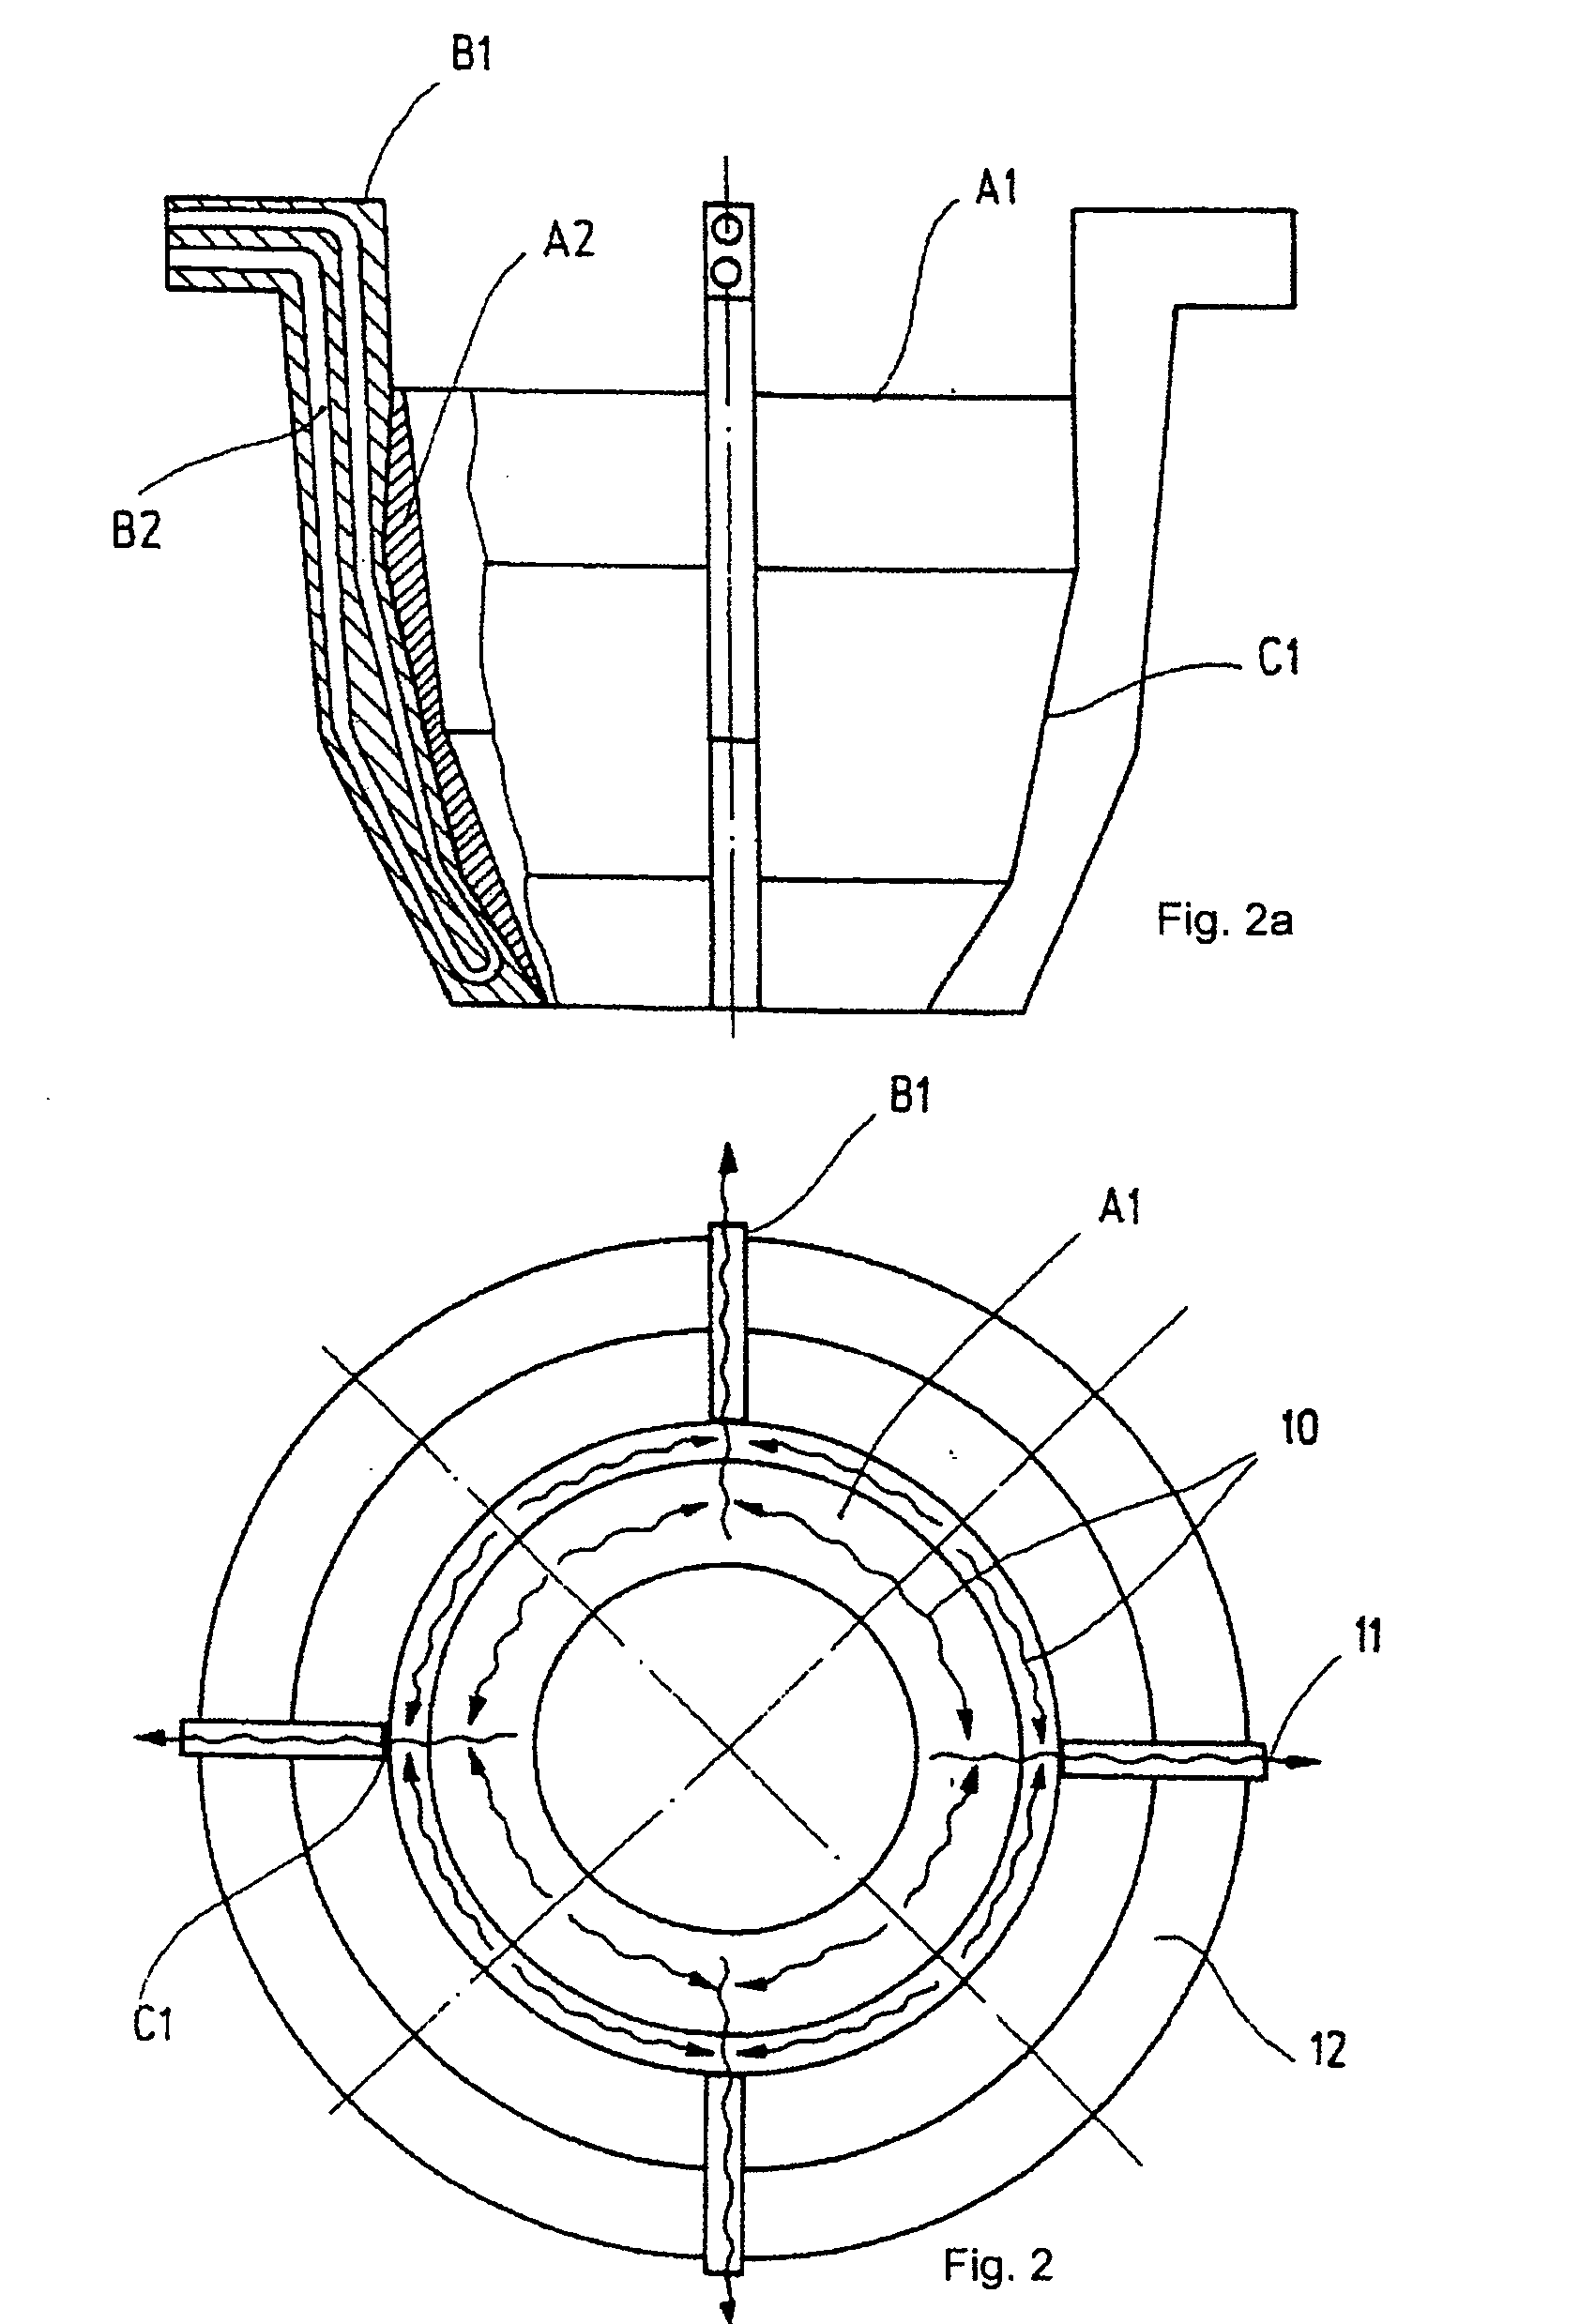 Optical component having an improved transient thermal behavior and method for improving the transient thermal behavior of an optical component